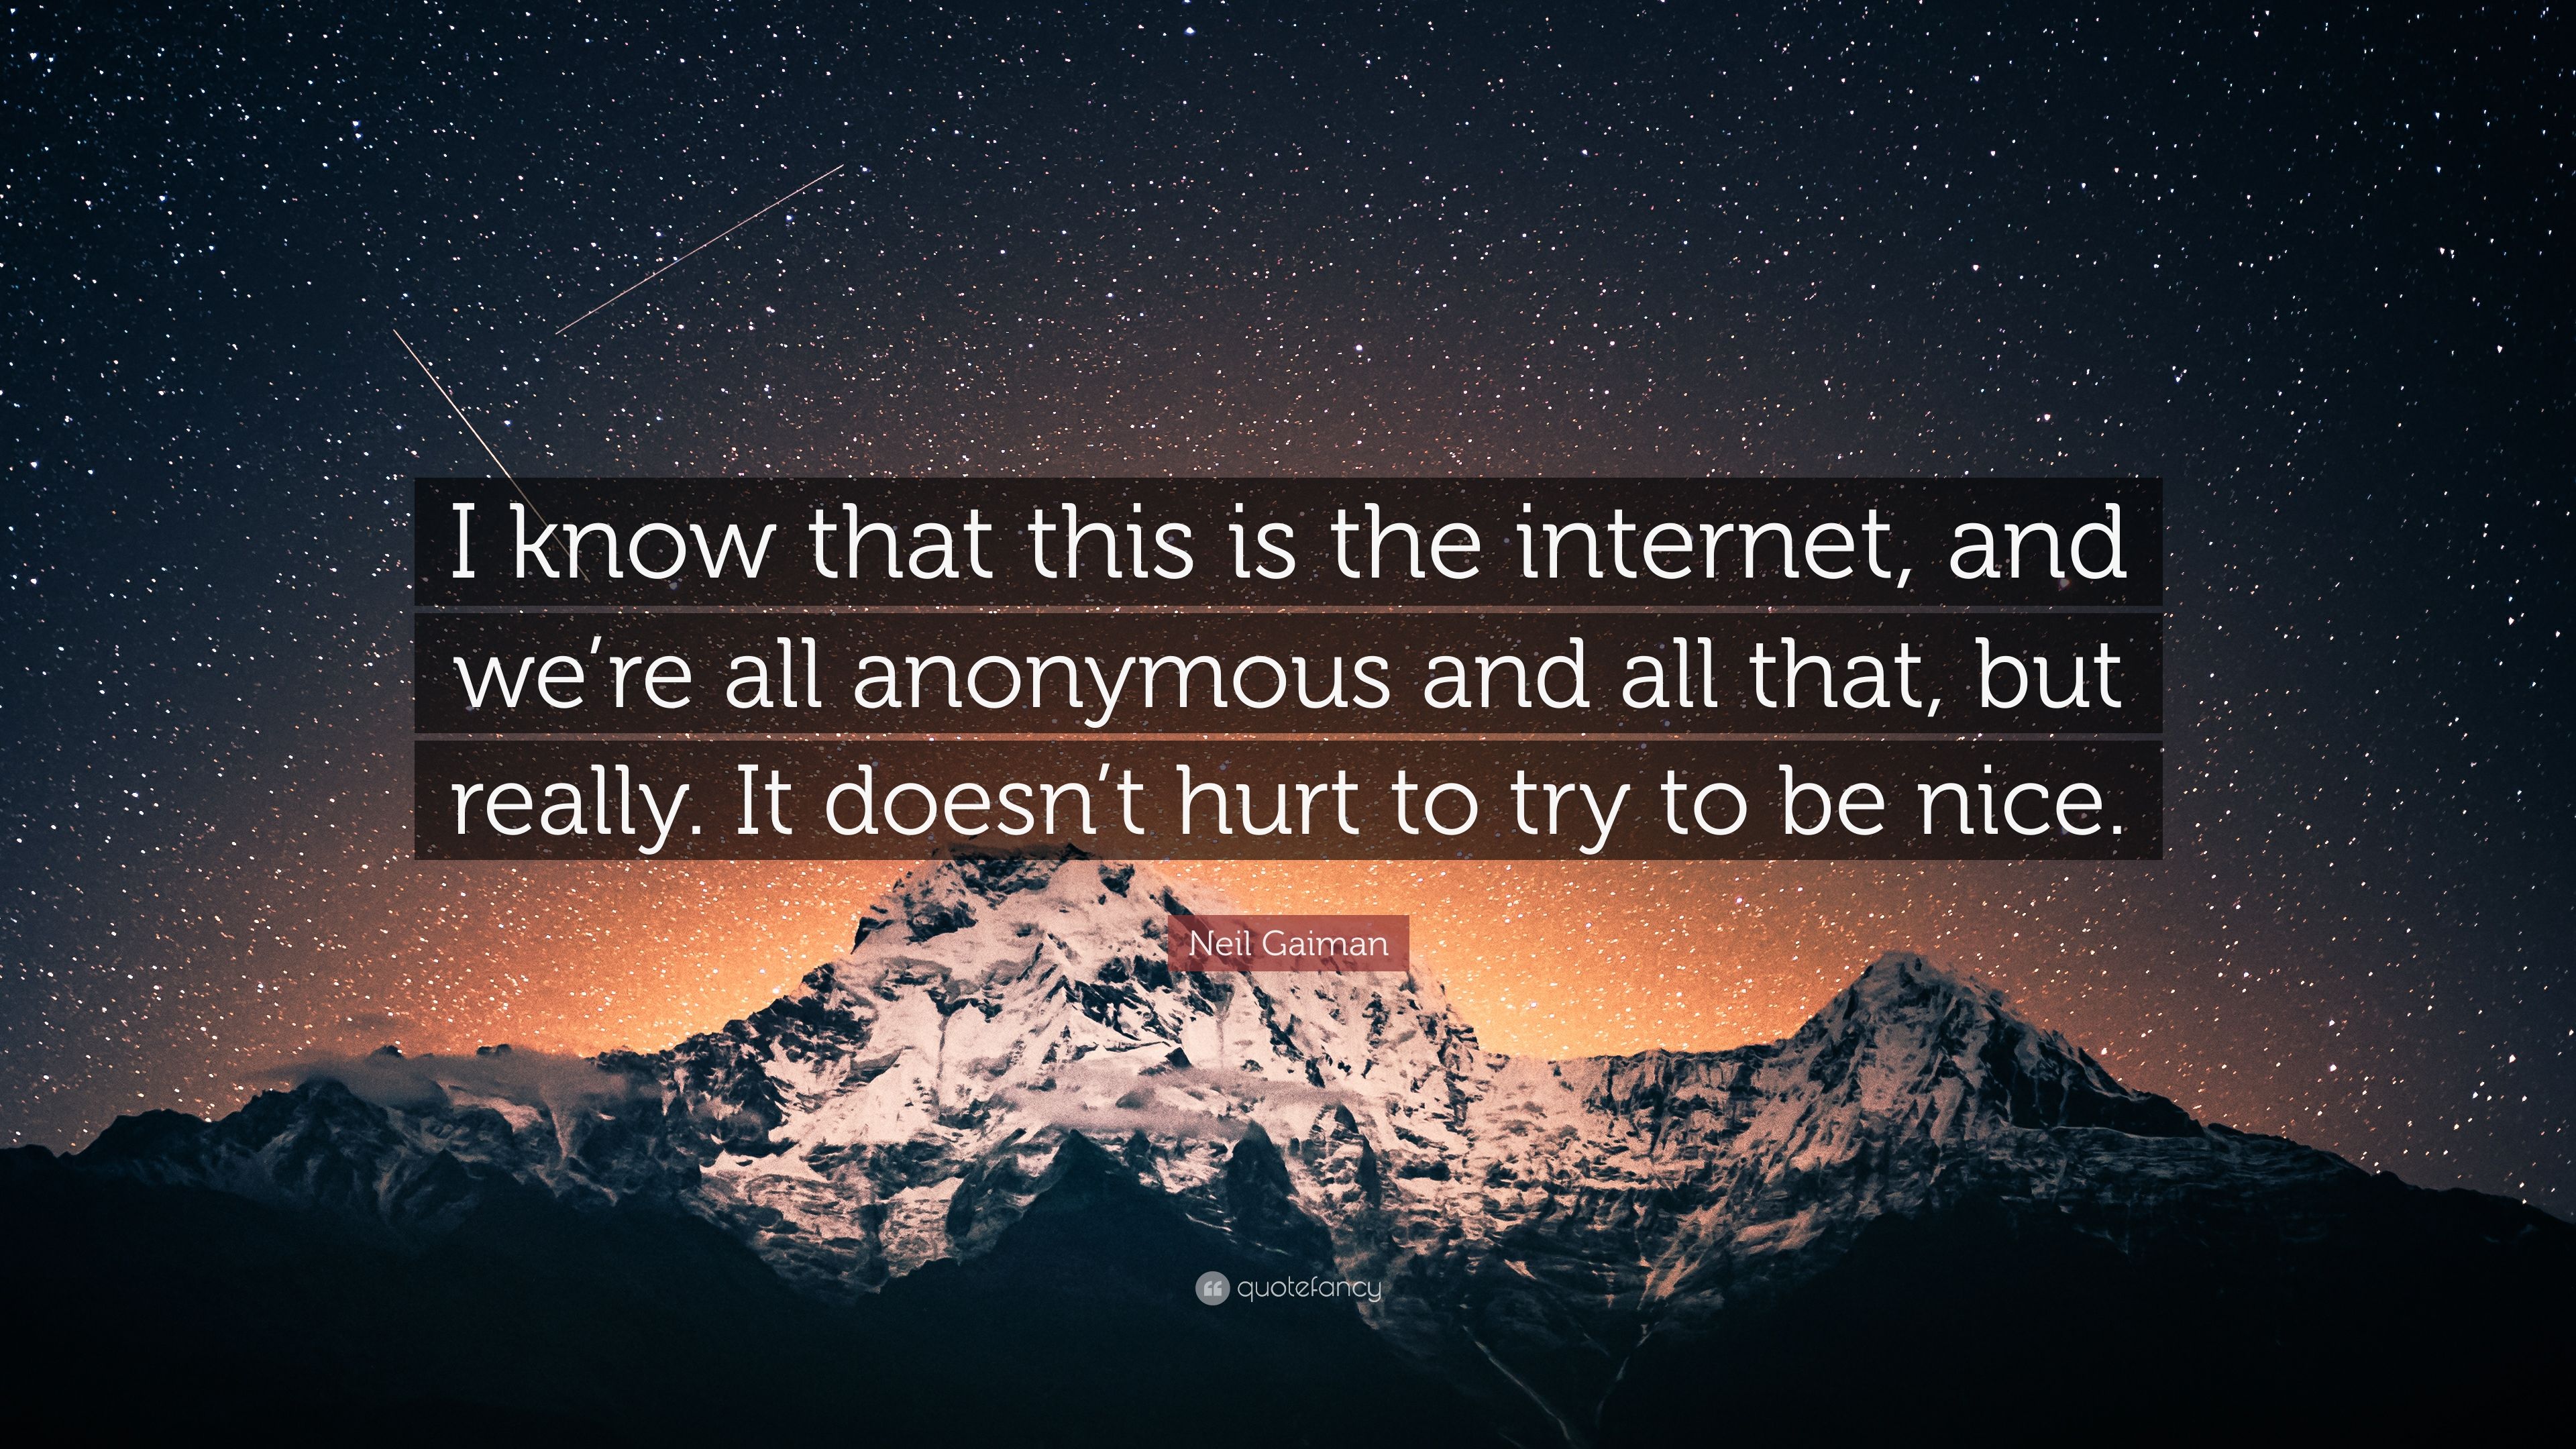 Neil Gaiman Quote: “I know that this is the internet, and we're all